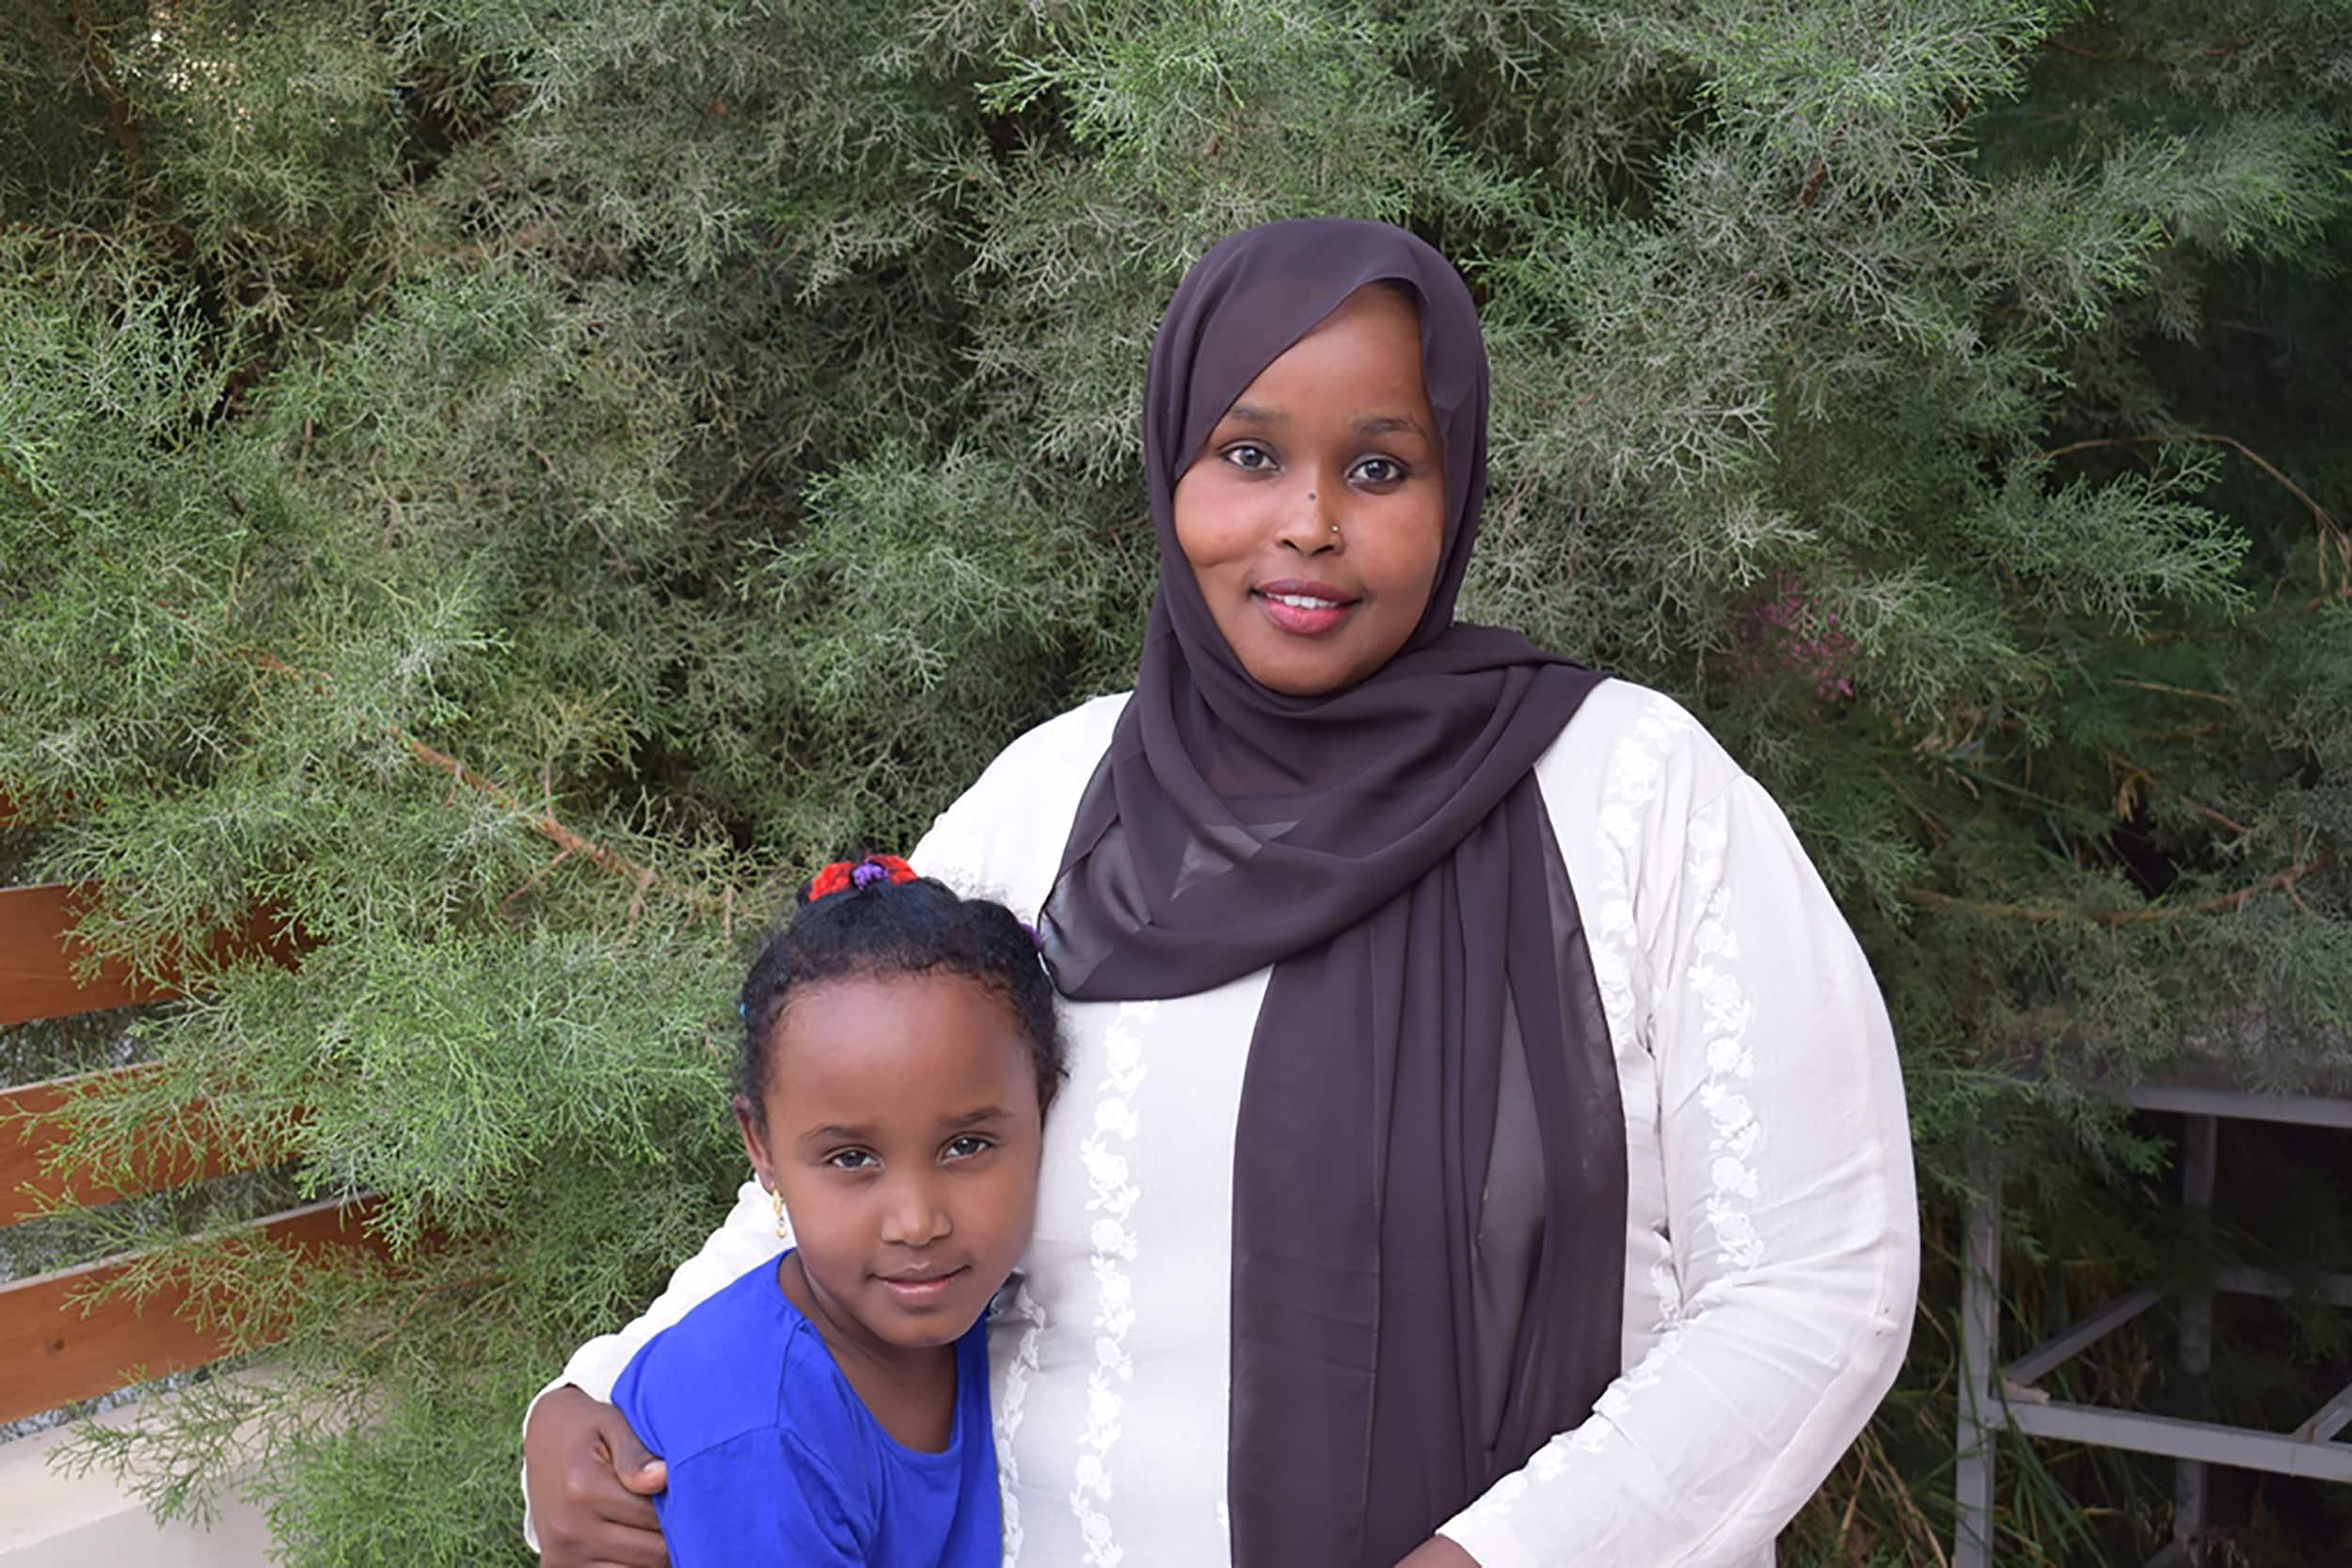 Somali mother reunited with daughter after three years apart.